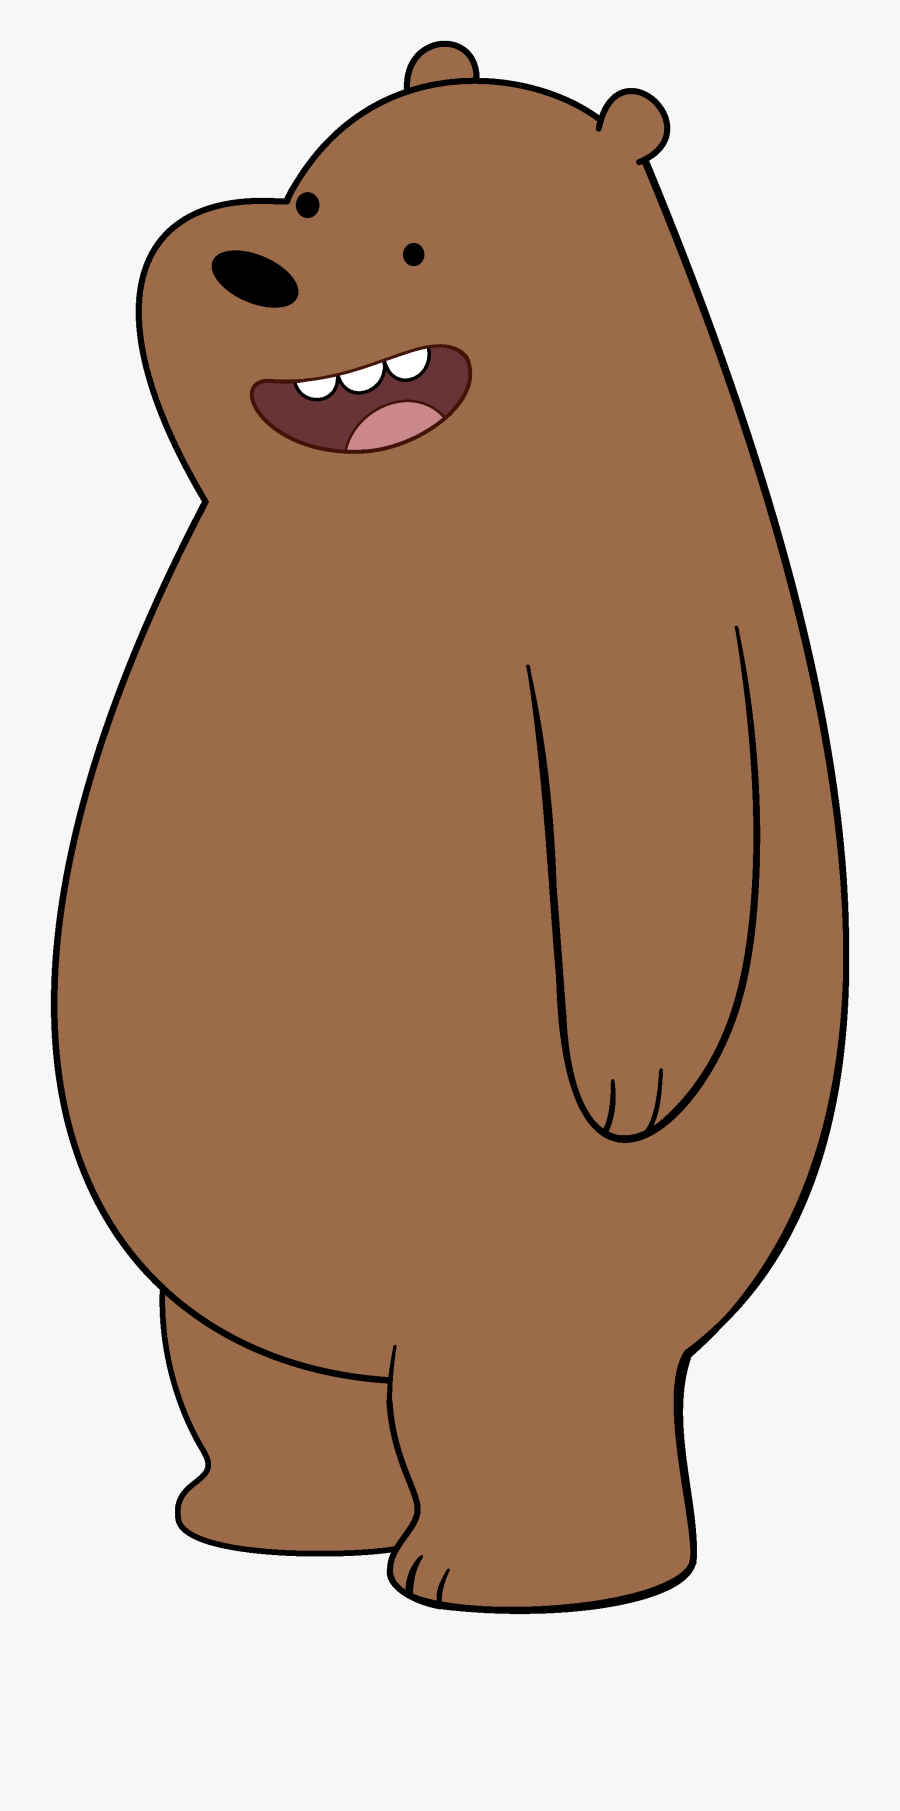 Grizzly Bear Pictures Cartoon Grizzly Bears Clipart Bodhiwasuen